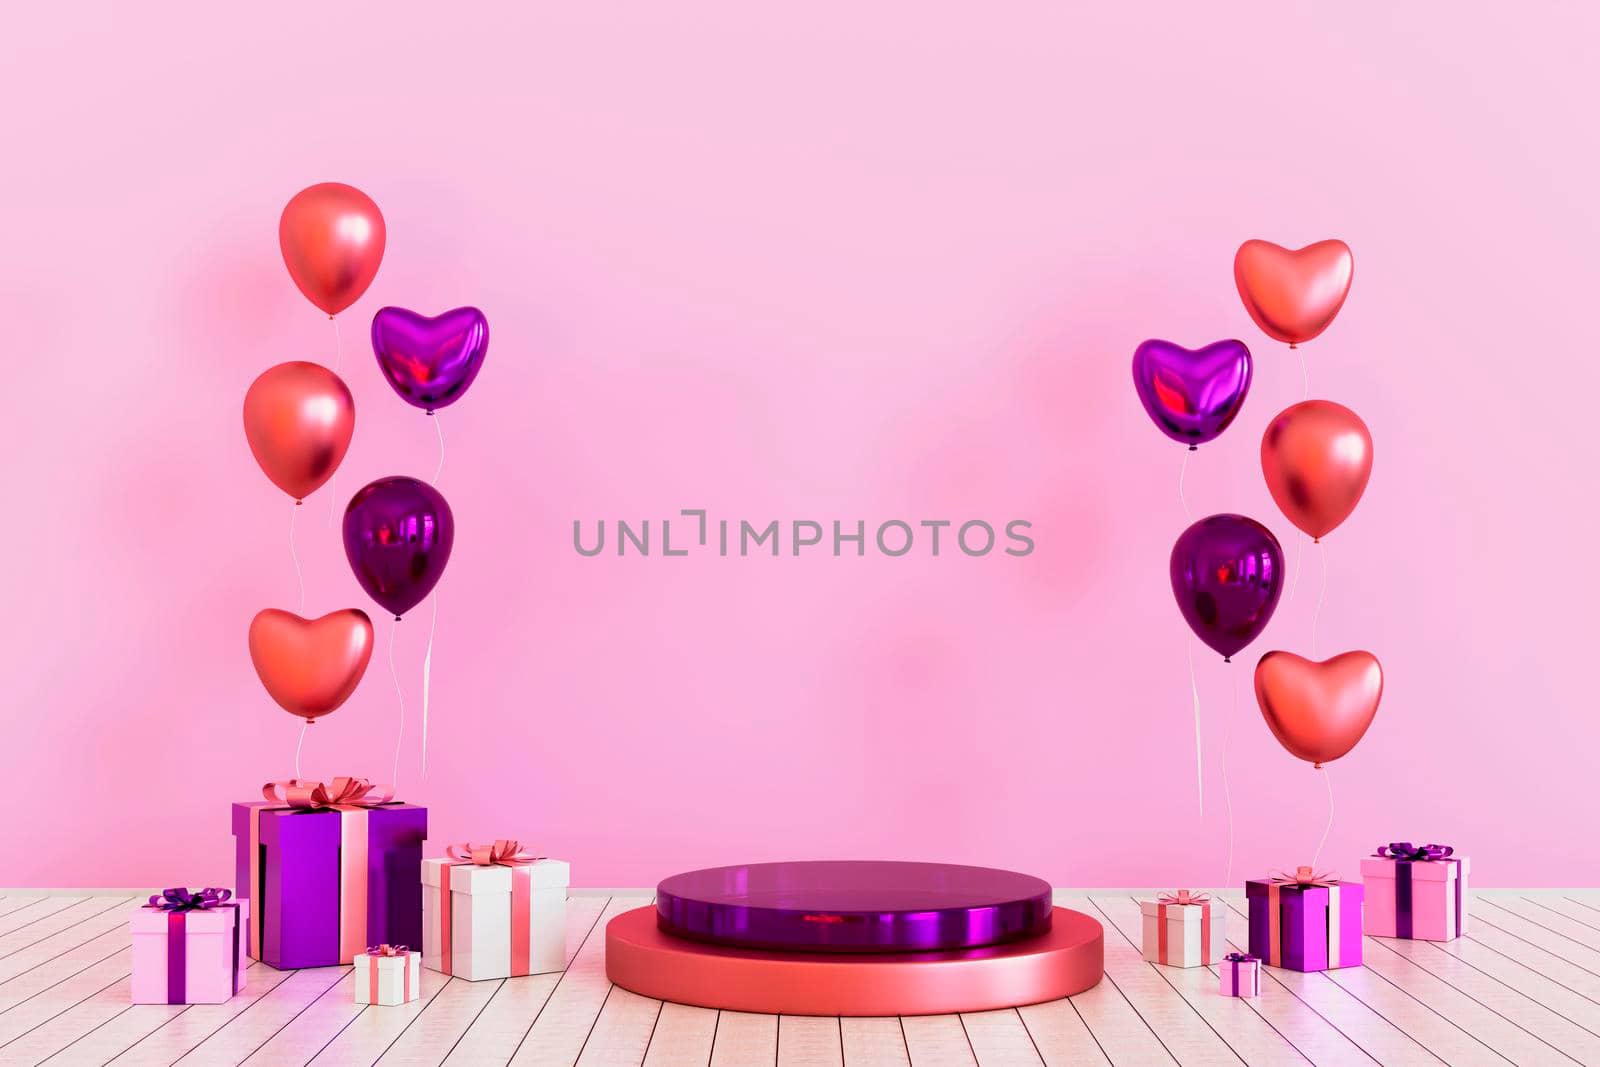 Cylinder podium with hearts and pink gift box and pink balloon pedestal product display stand romance love platform on pink background 3D illustration